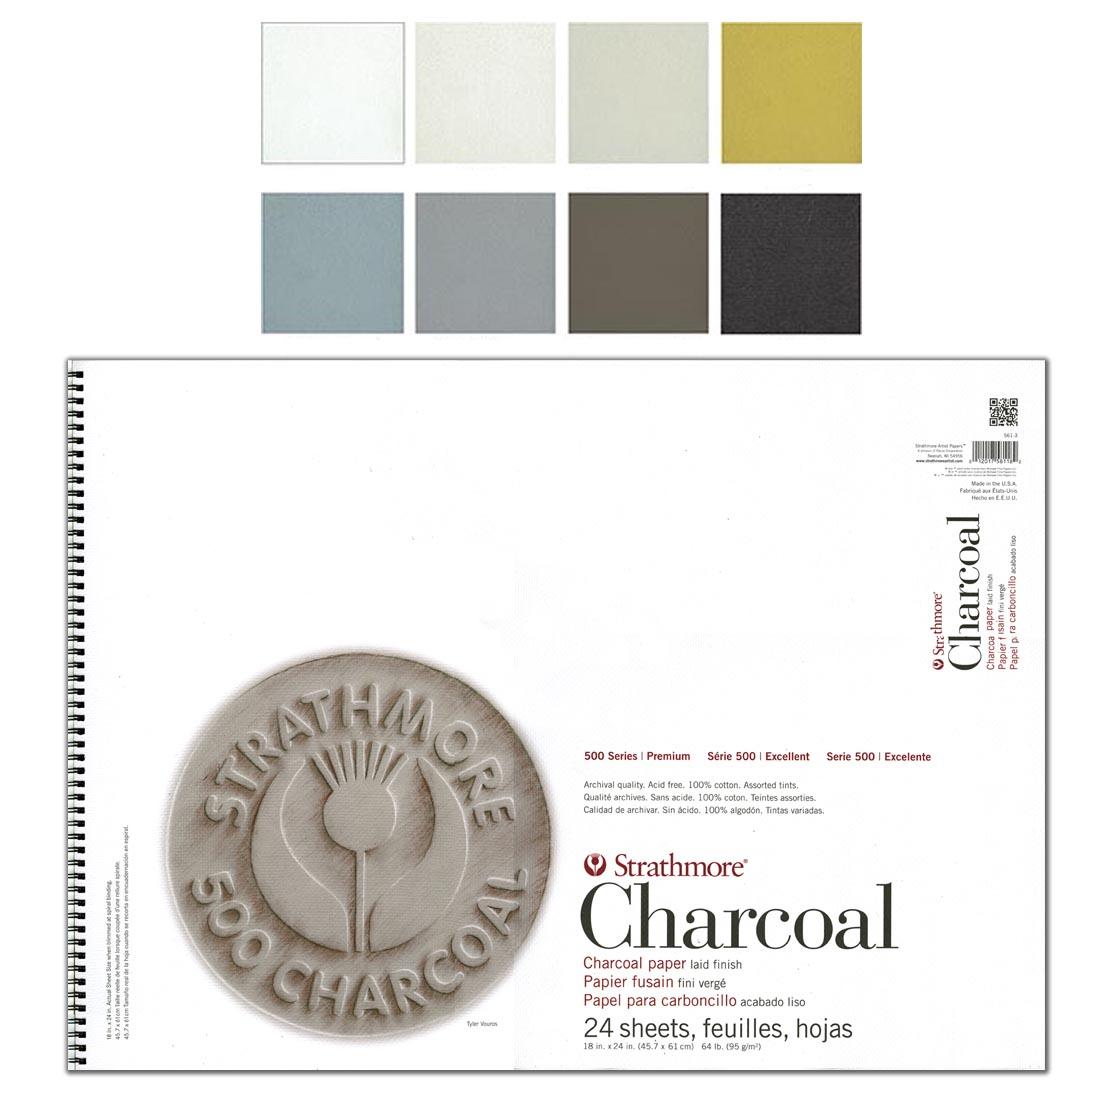 Strathmore 500 Series Charcoal/Pastel Paper Pad with swatches of the Assorted Colors above it